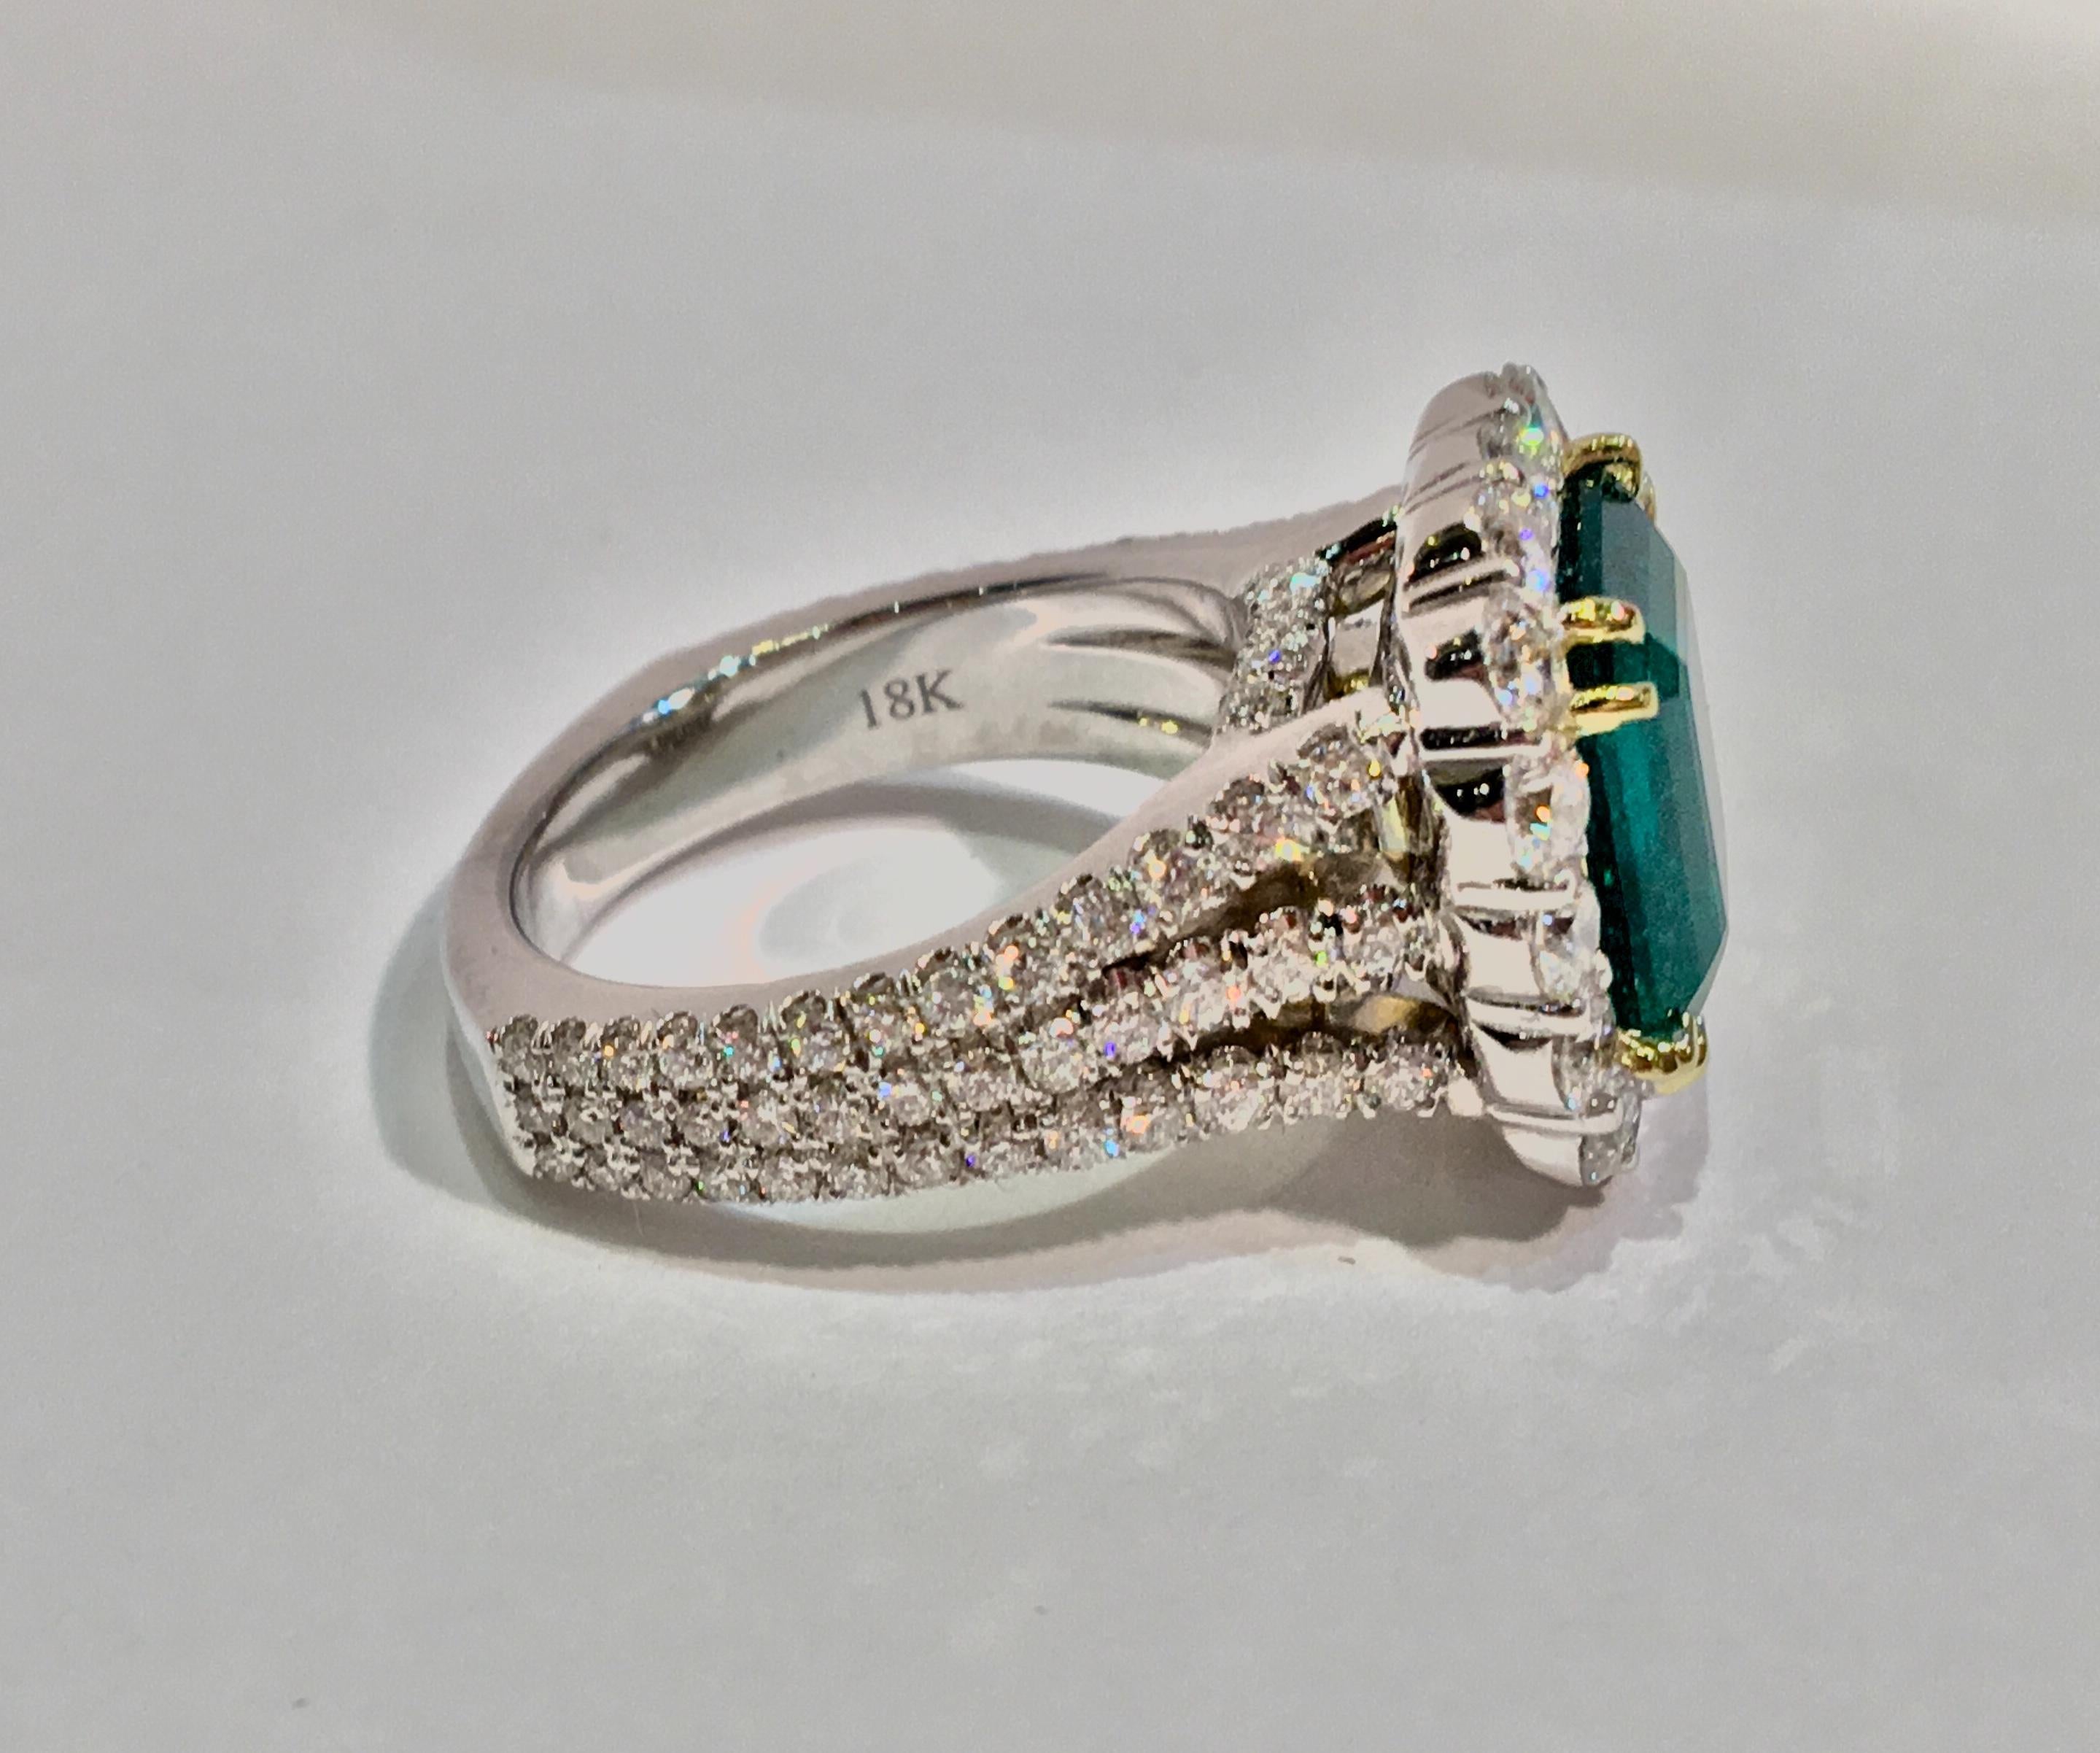 Emerald Cut Finest Quality GIA Certified 6.39 Carat Colombian Emerald and Diamond 18K Ring